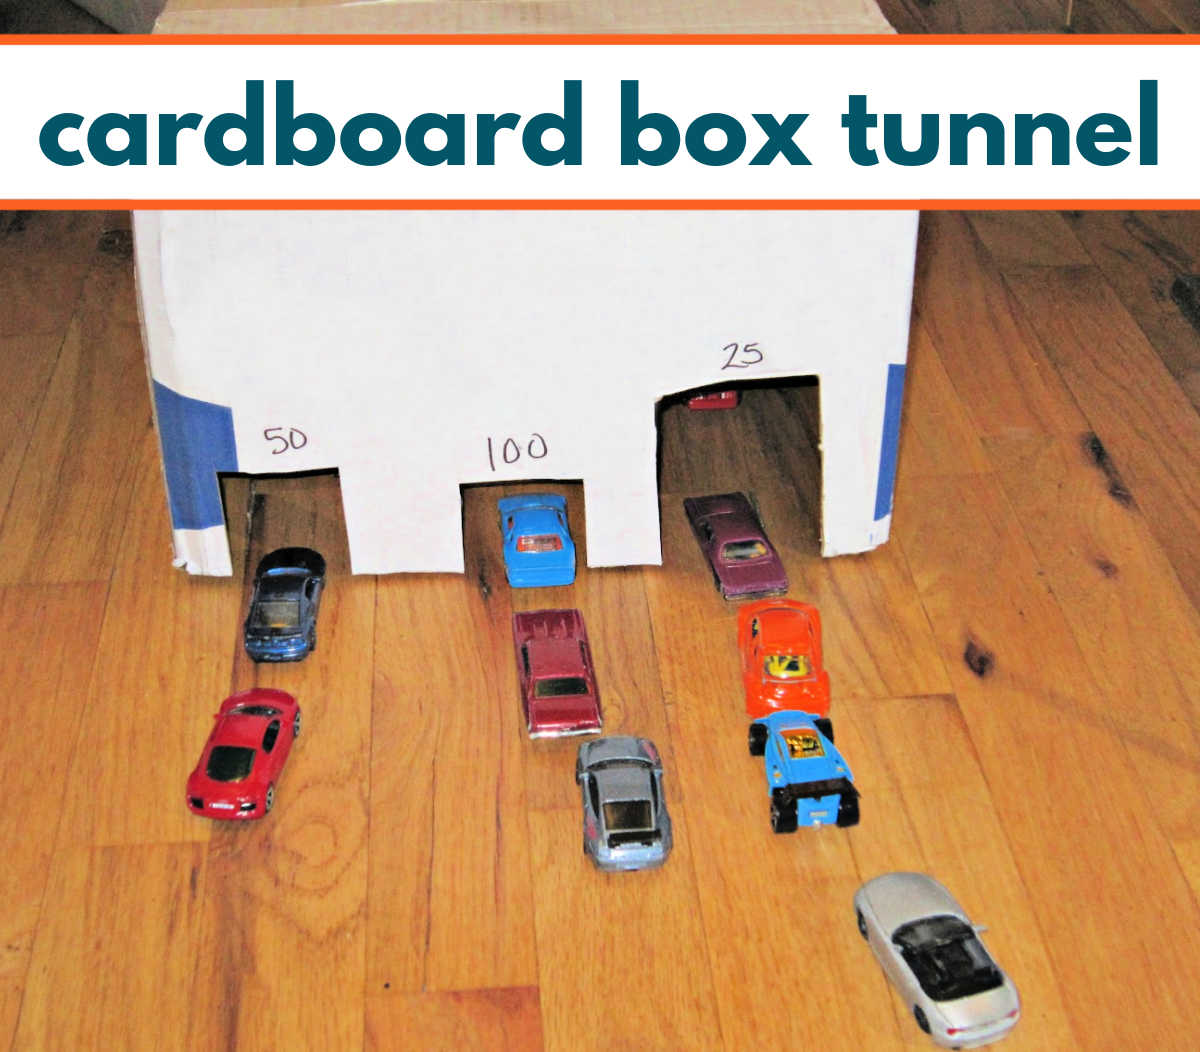 Three entrance tunnel made out of a cardboard box with lines of toy cars waiting to go through. 